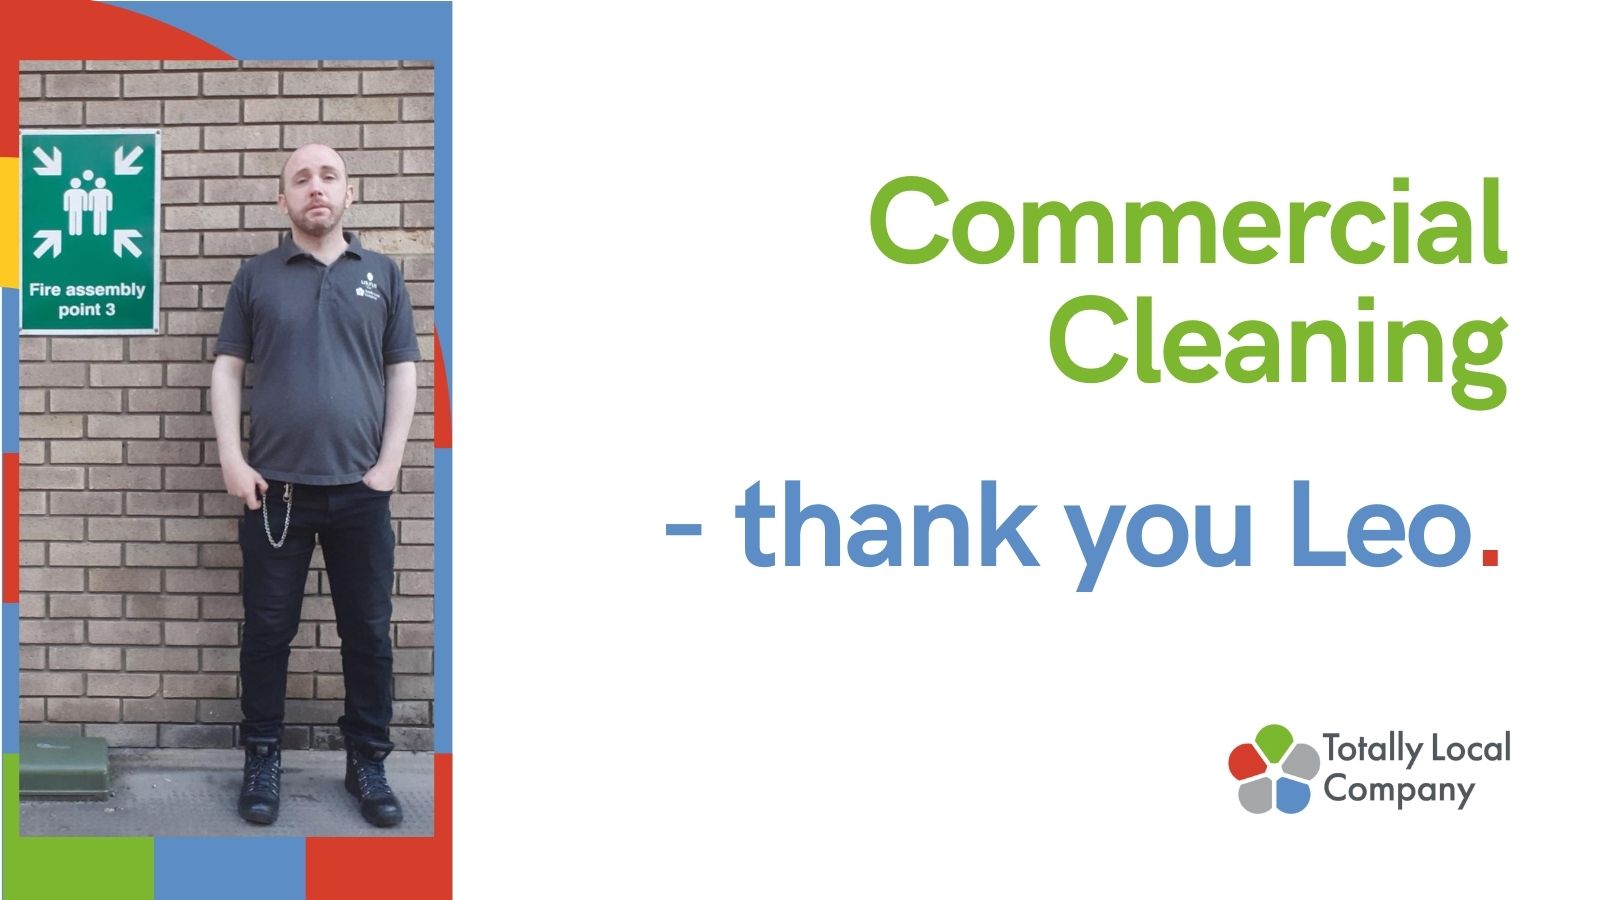 Commercial Cleaning thank you